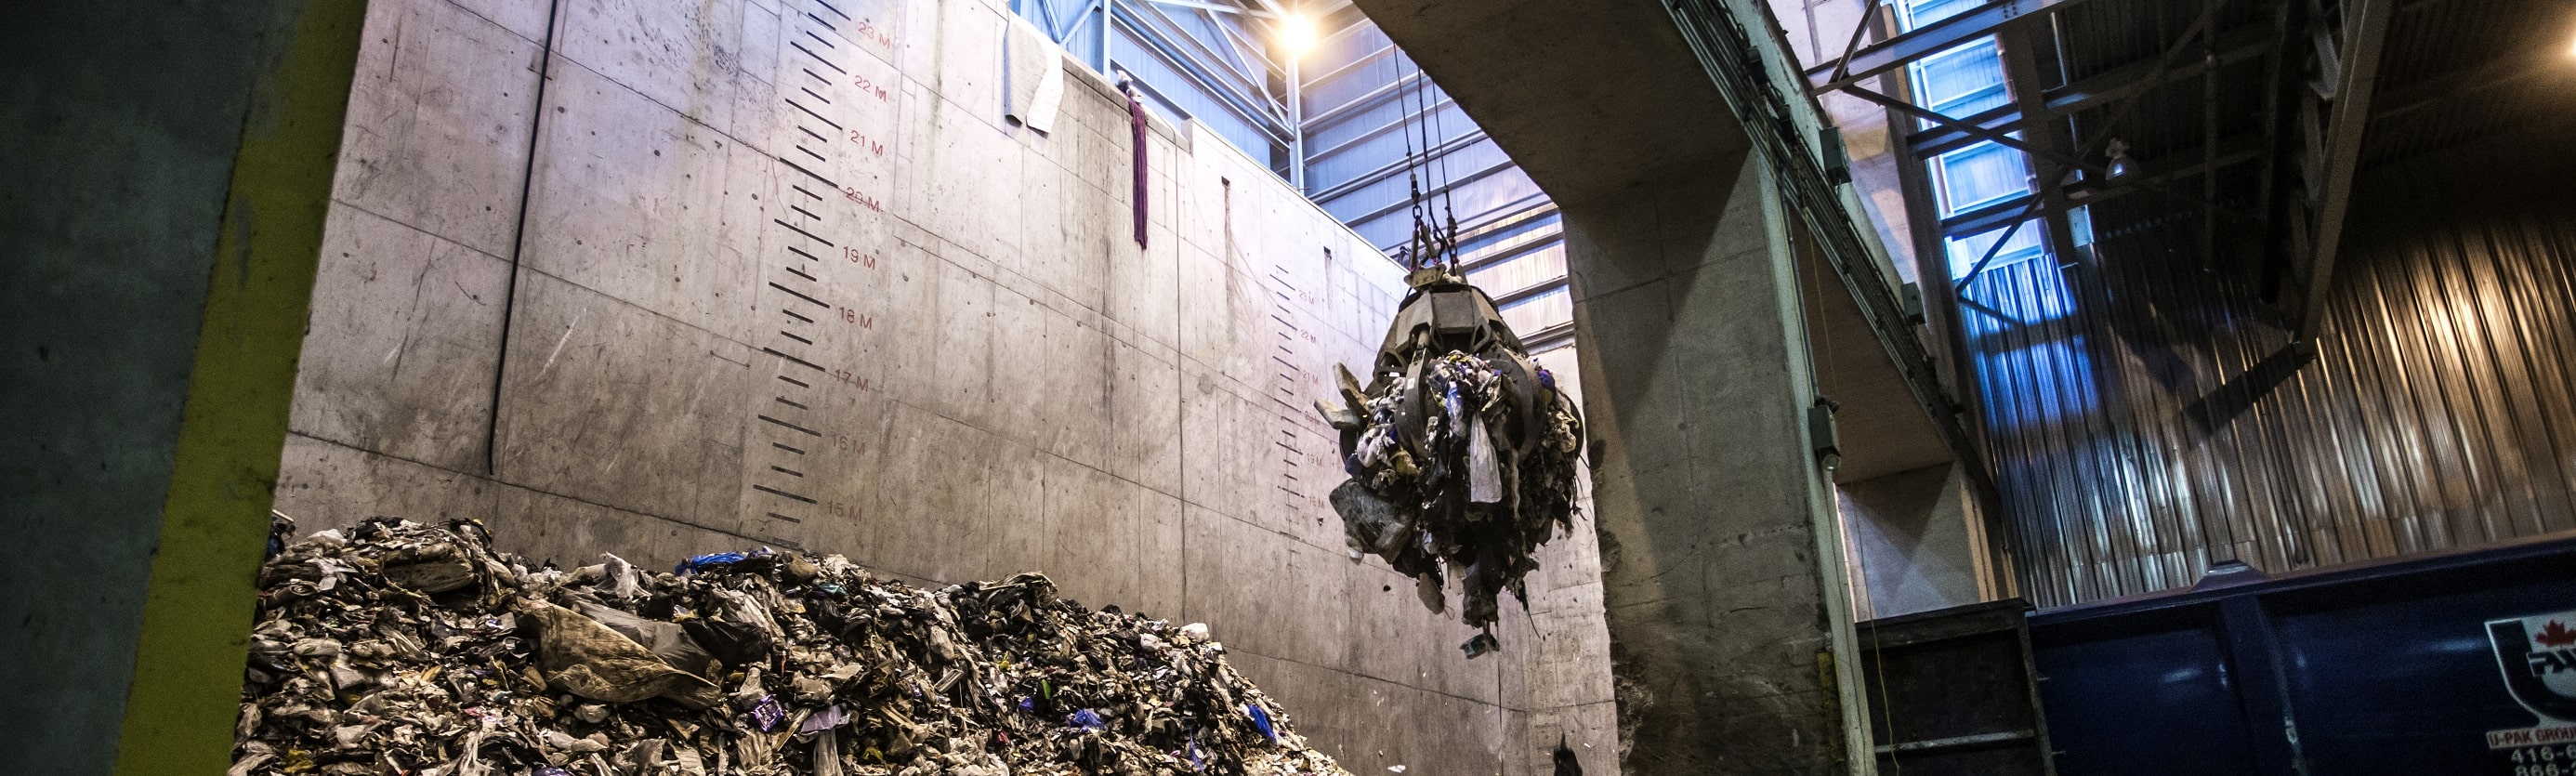 A large grapple holding a pile of garbage